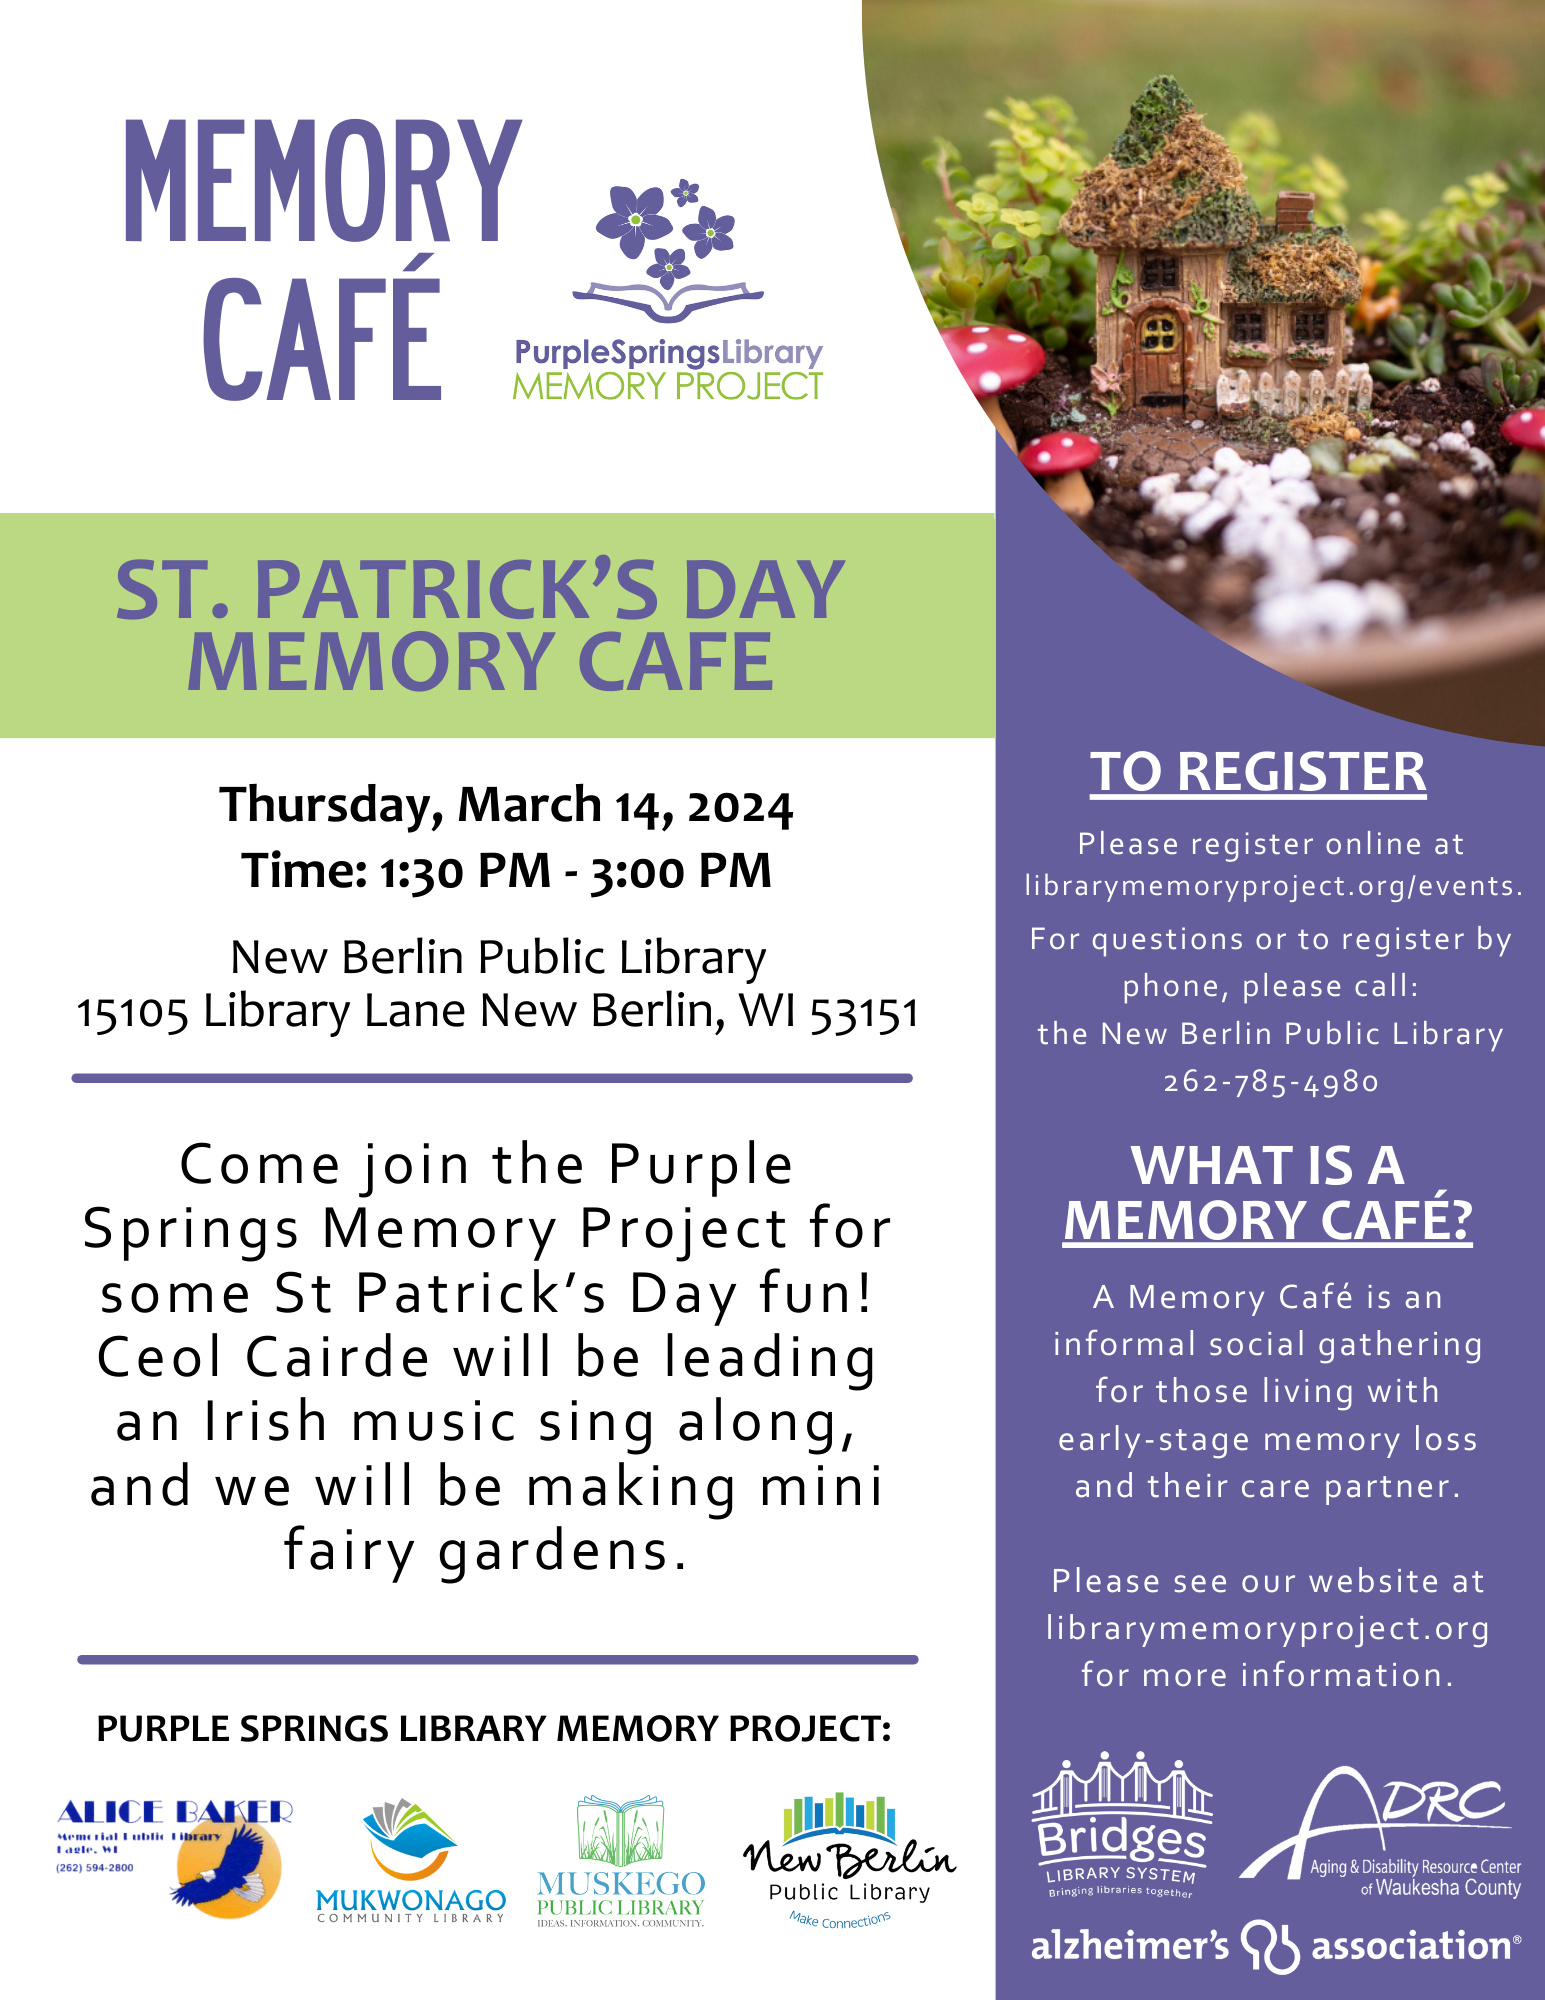 Image of poster includes description of event (also listed below). Poster also includes image of a small fairy garden, a bed of moss and miniature clay house and decorations in the moss. Poster also lists participating libraries as Eagle Public Library, Mukwonago Public Library, Muskego Public Library, and New Berlin Public Library. 